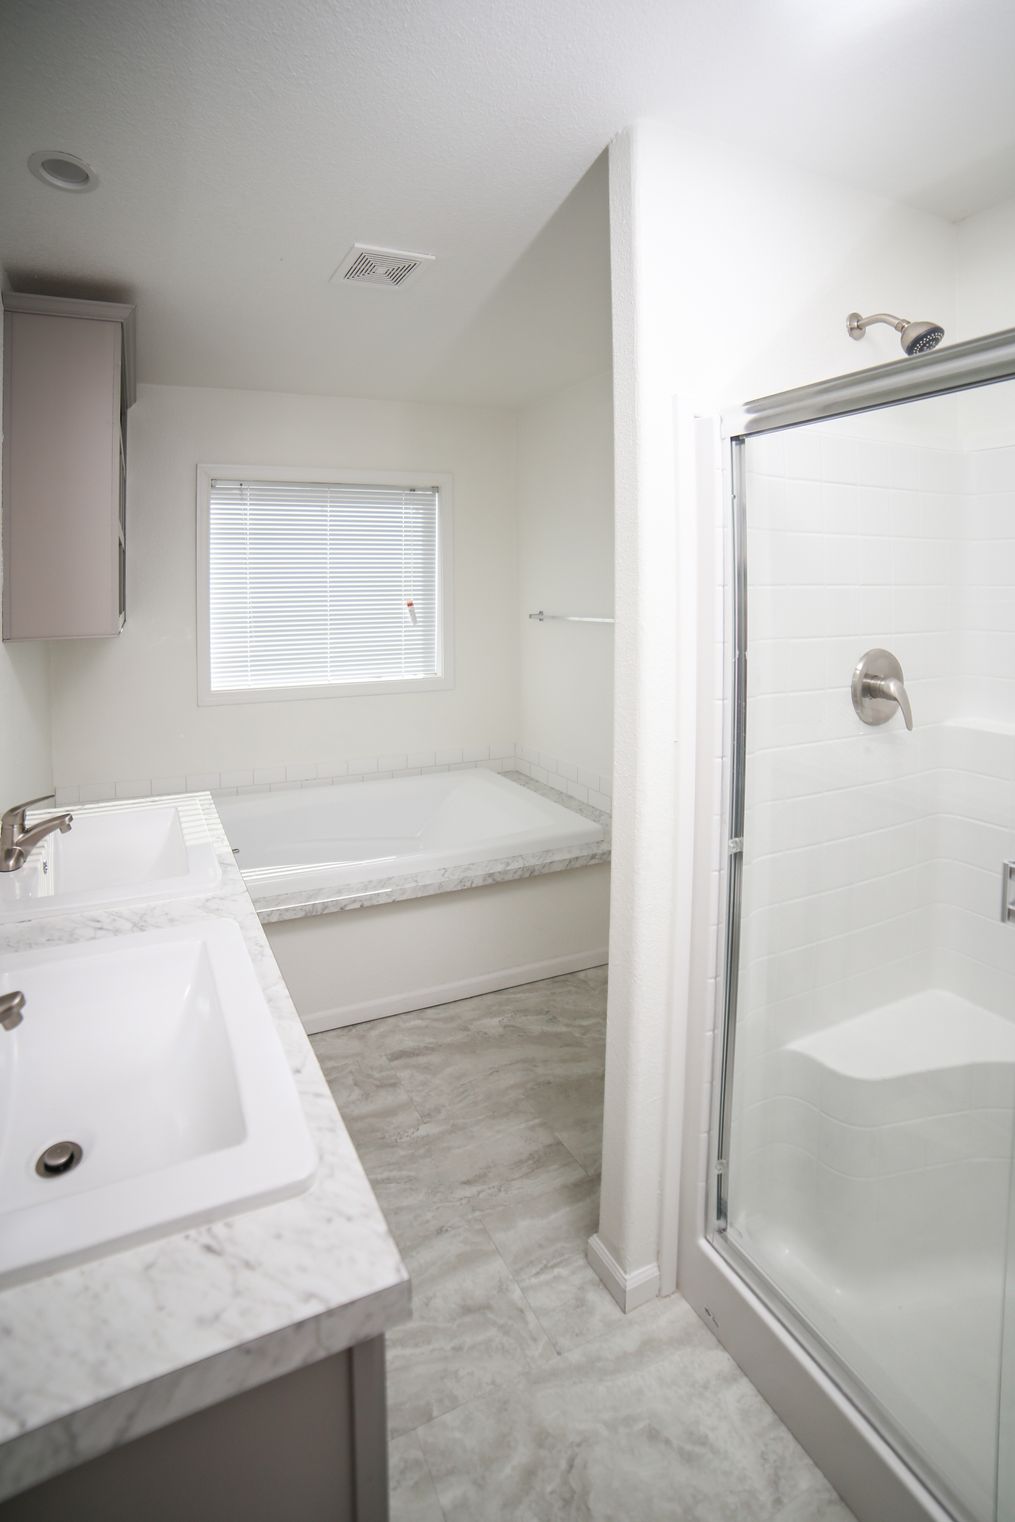 The CYAN Master Bathroom. This Manufactured Mobile Home features 2 bedrooms and 2 baths.